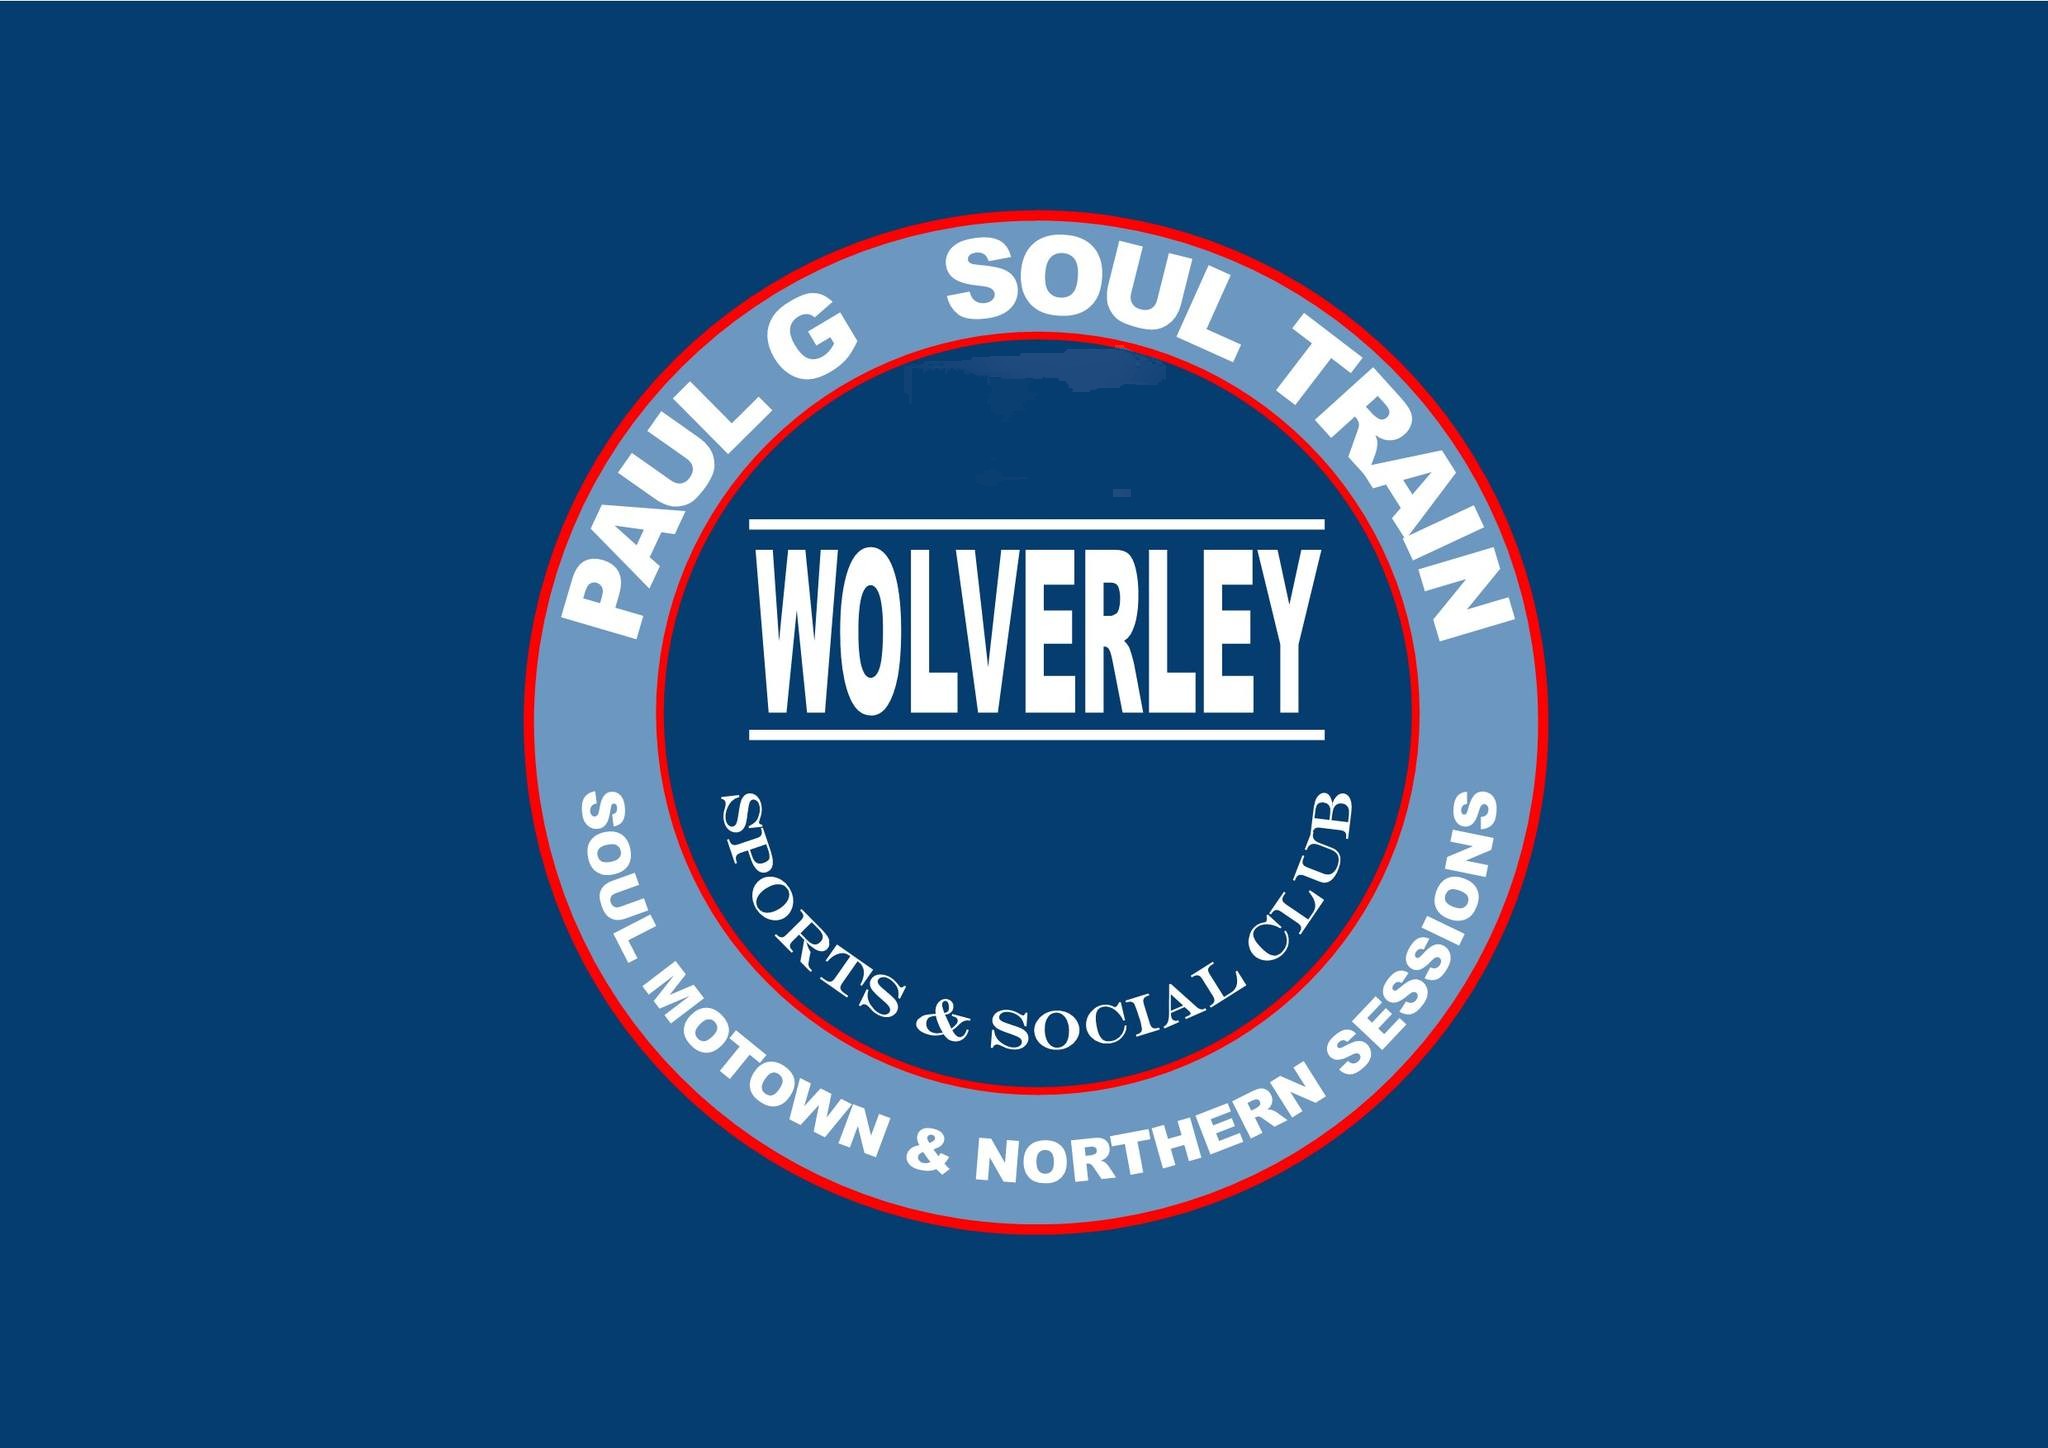 Wolverley Sports and Social Club